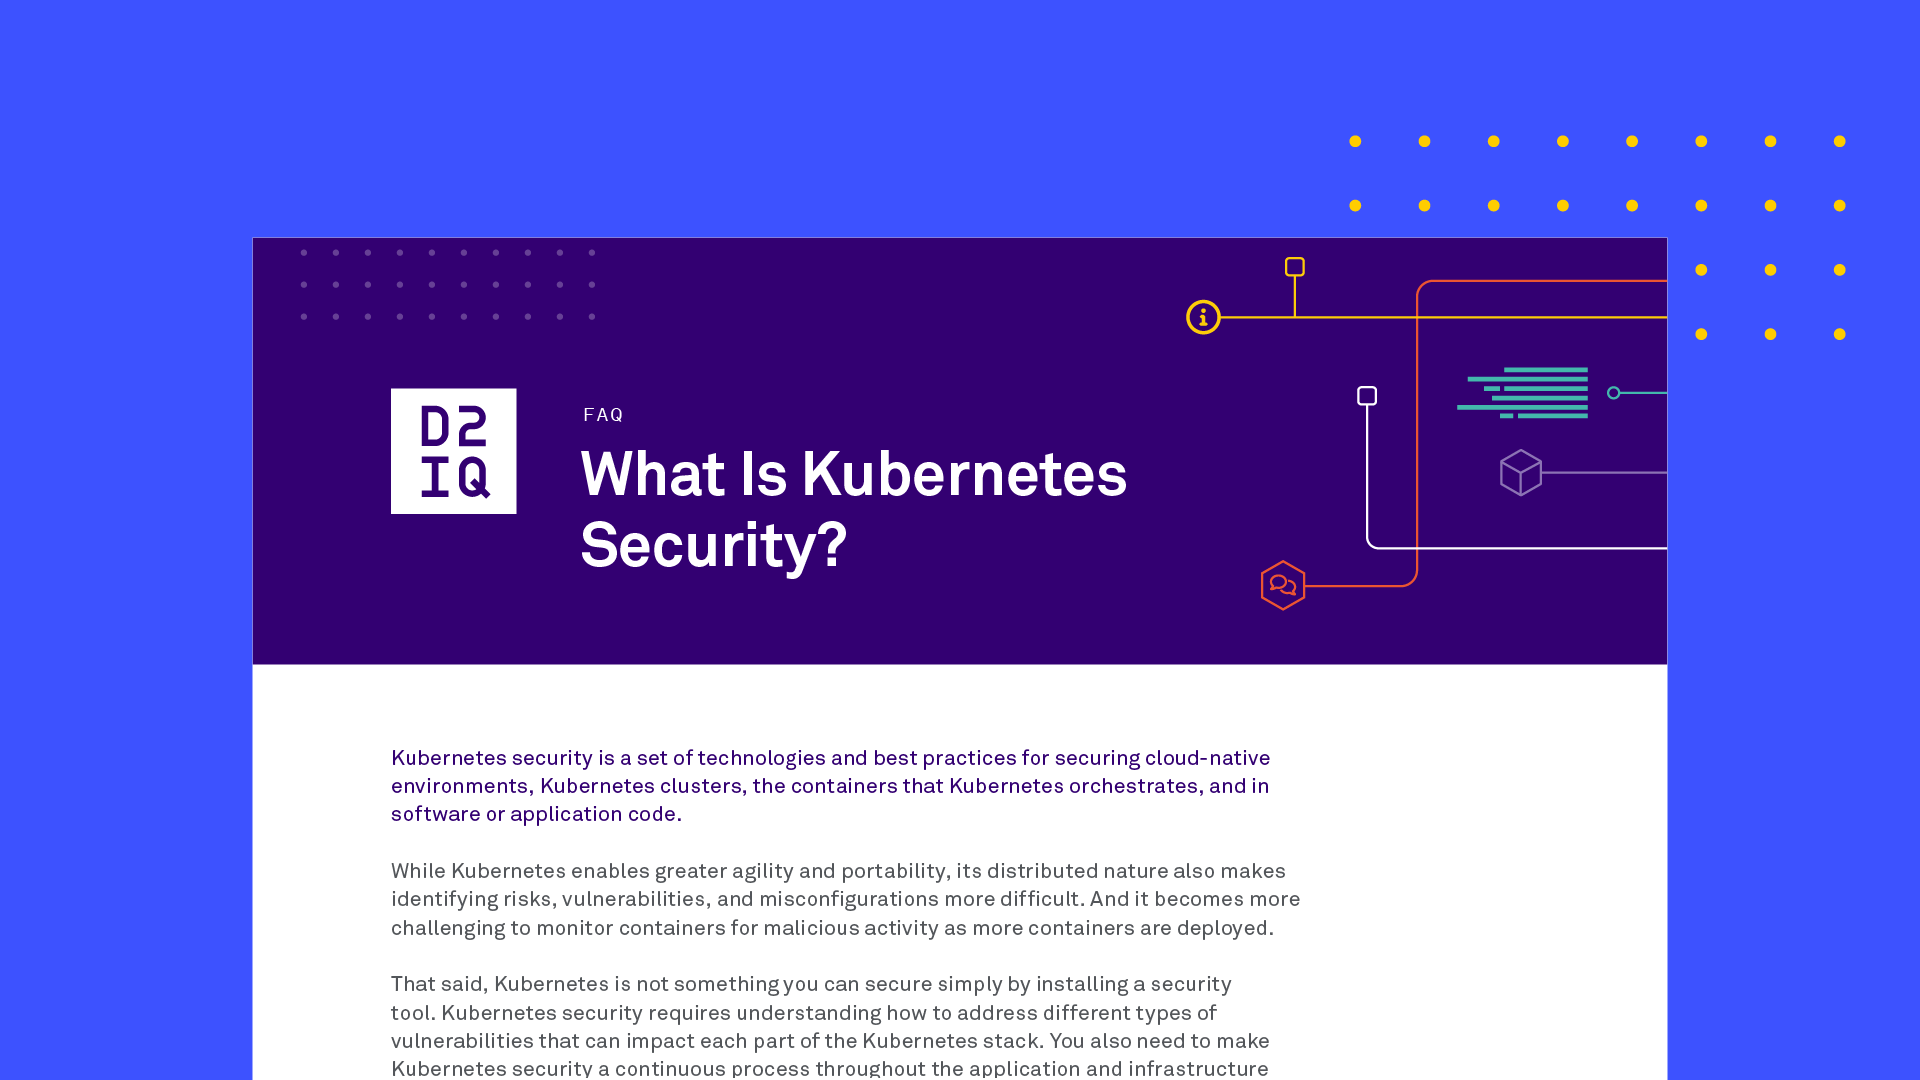 What is Kubernetes Security?